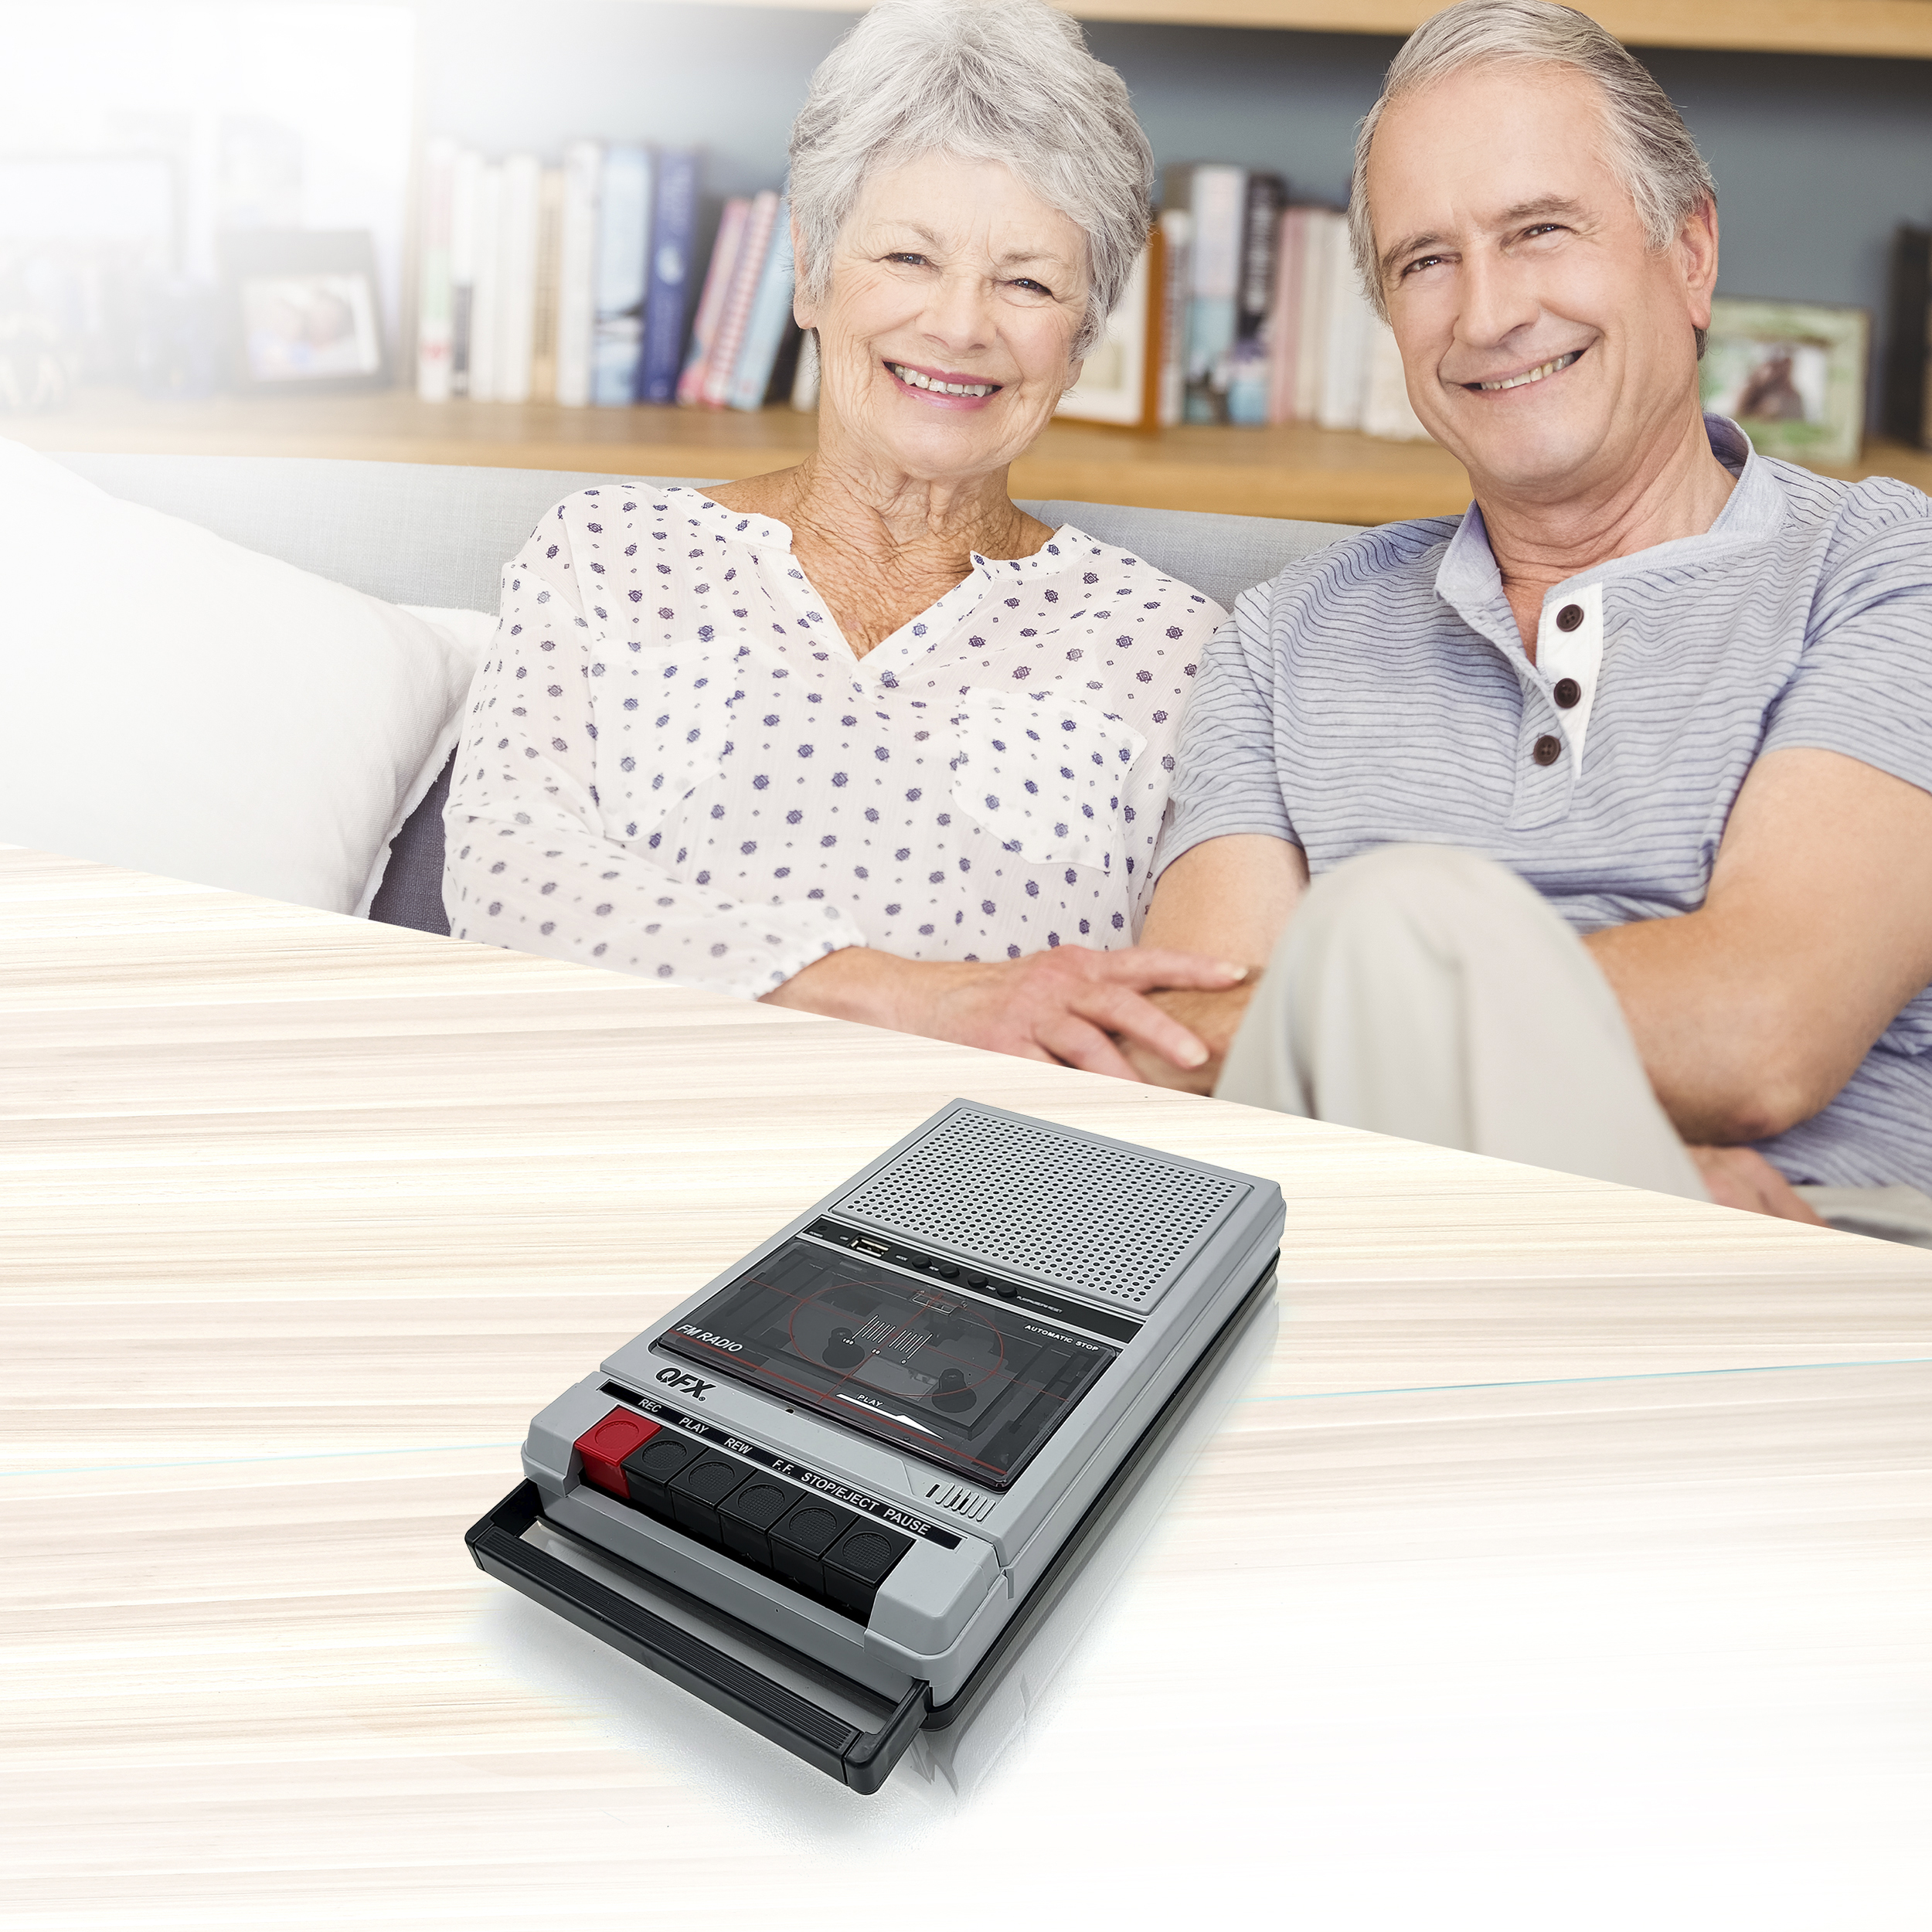 Qfx Classic Cassette Recorder Meets Today's Technology - Now with  Bluetooth! 